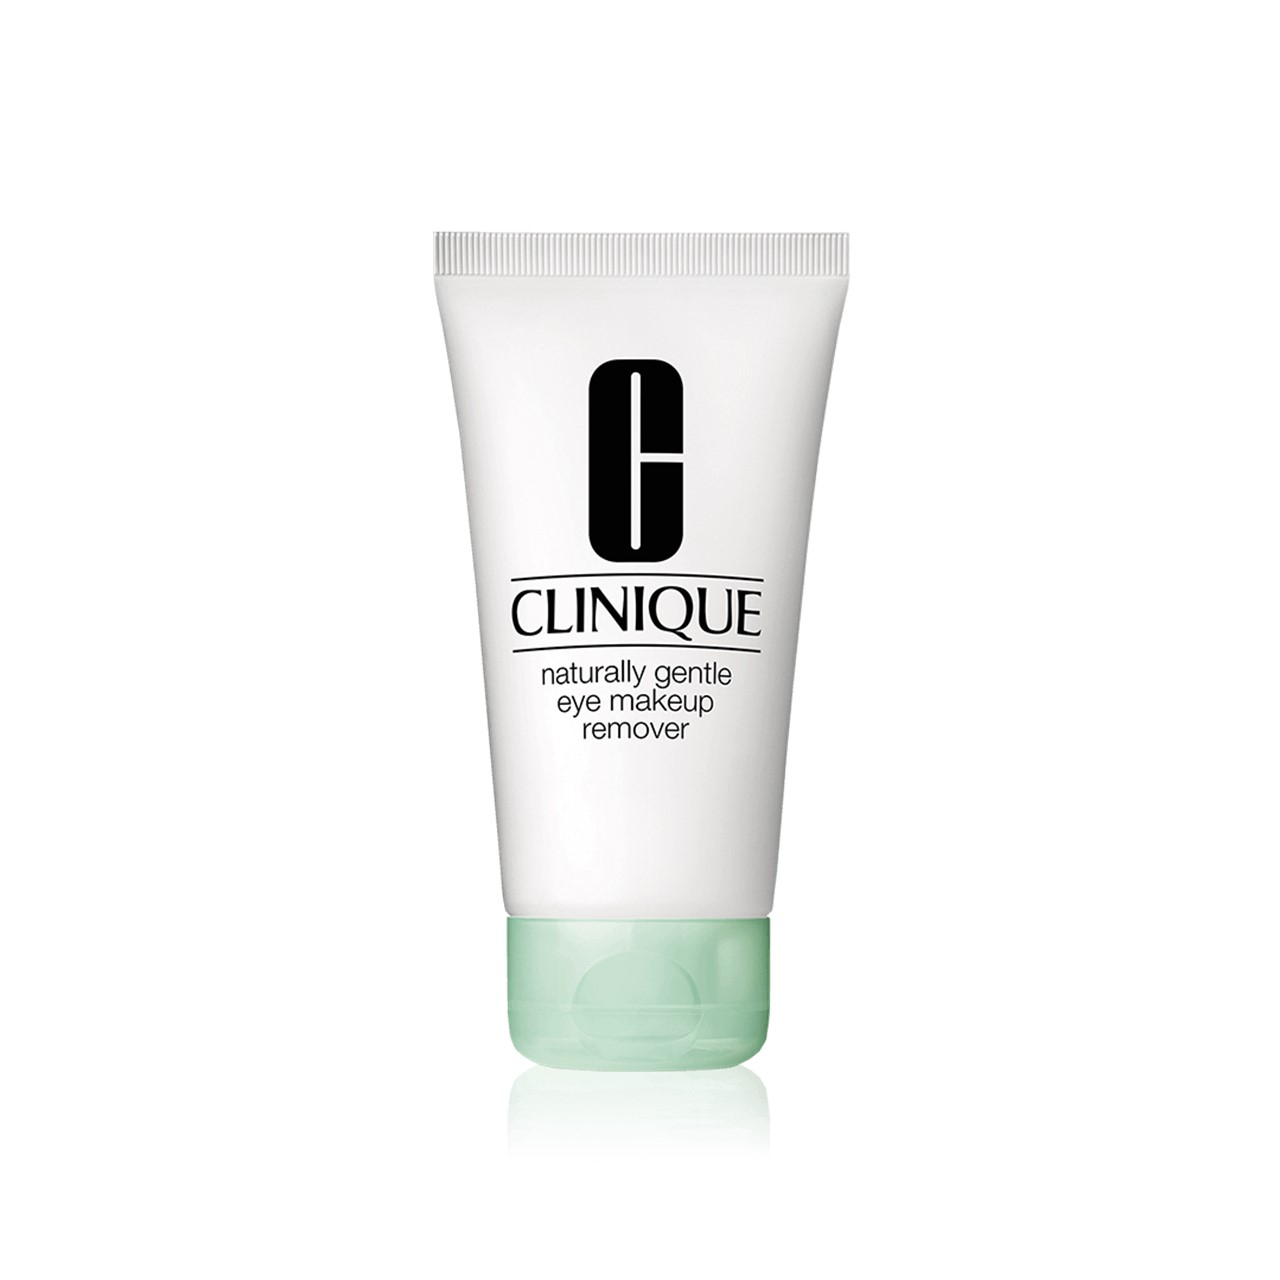 Clinique Naturally Gentle Eye Make-up Remover 75ml (2.54fl oz)